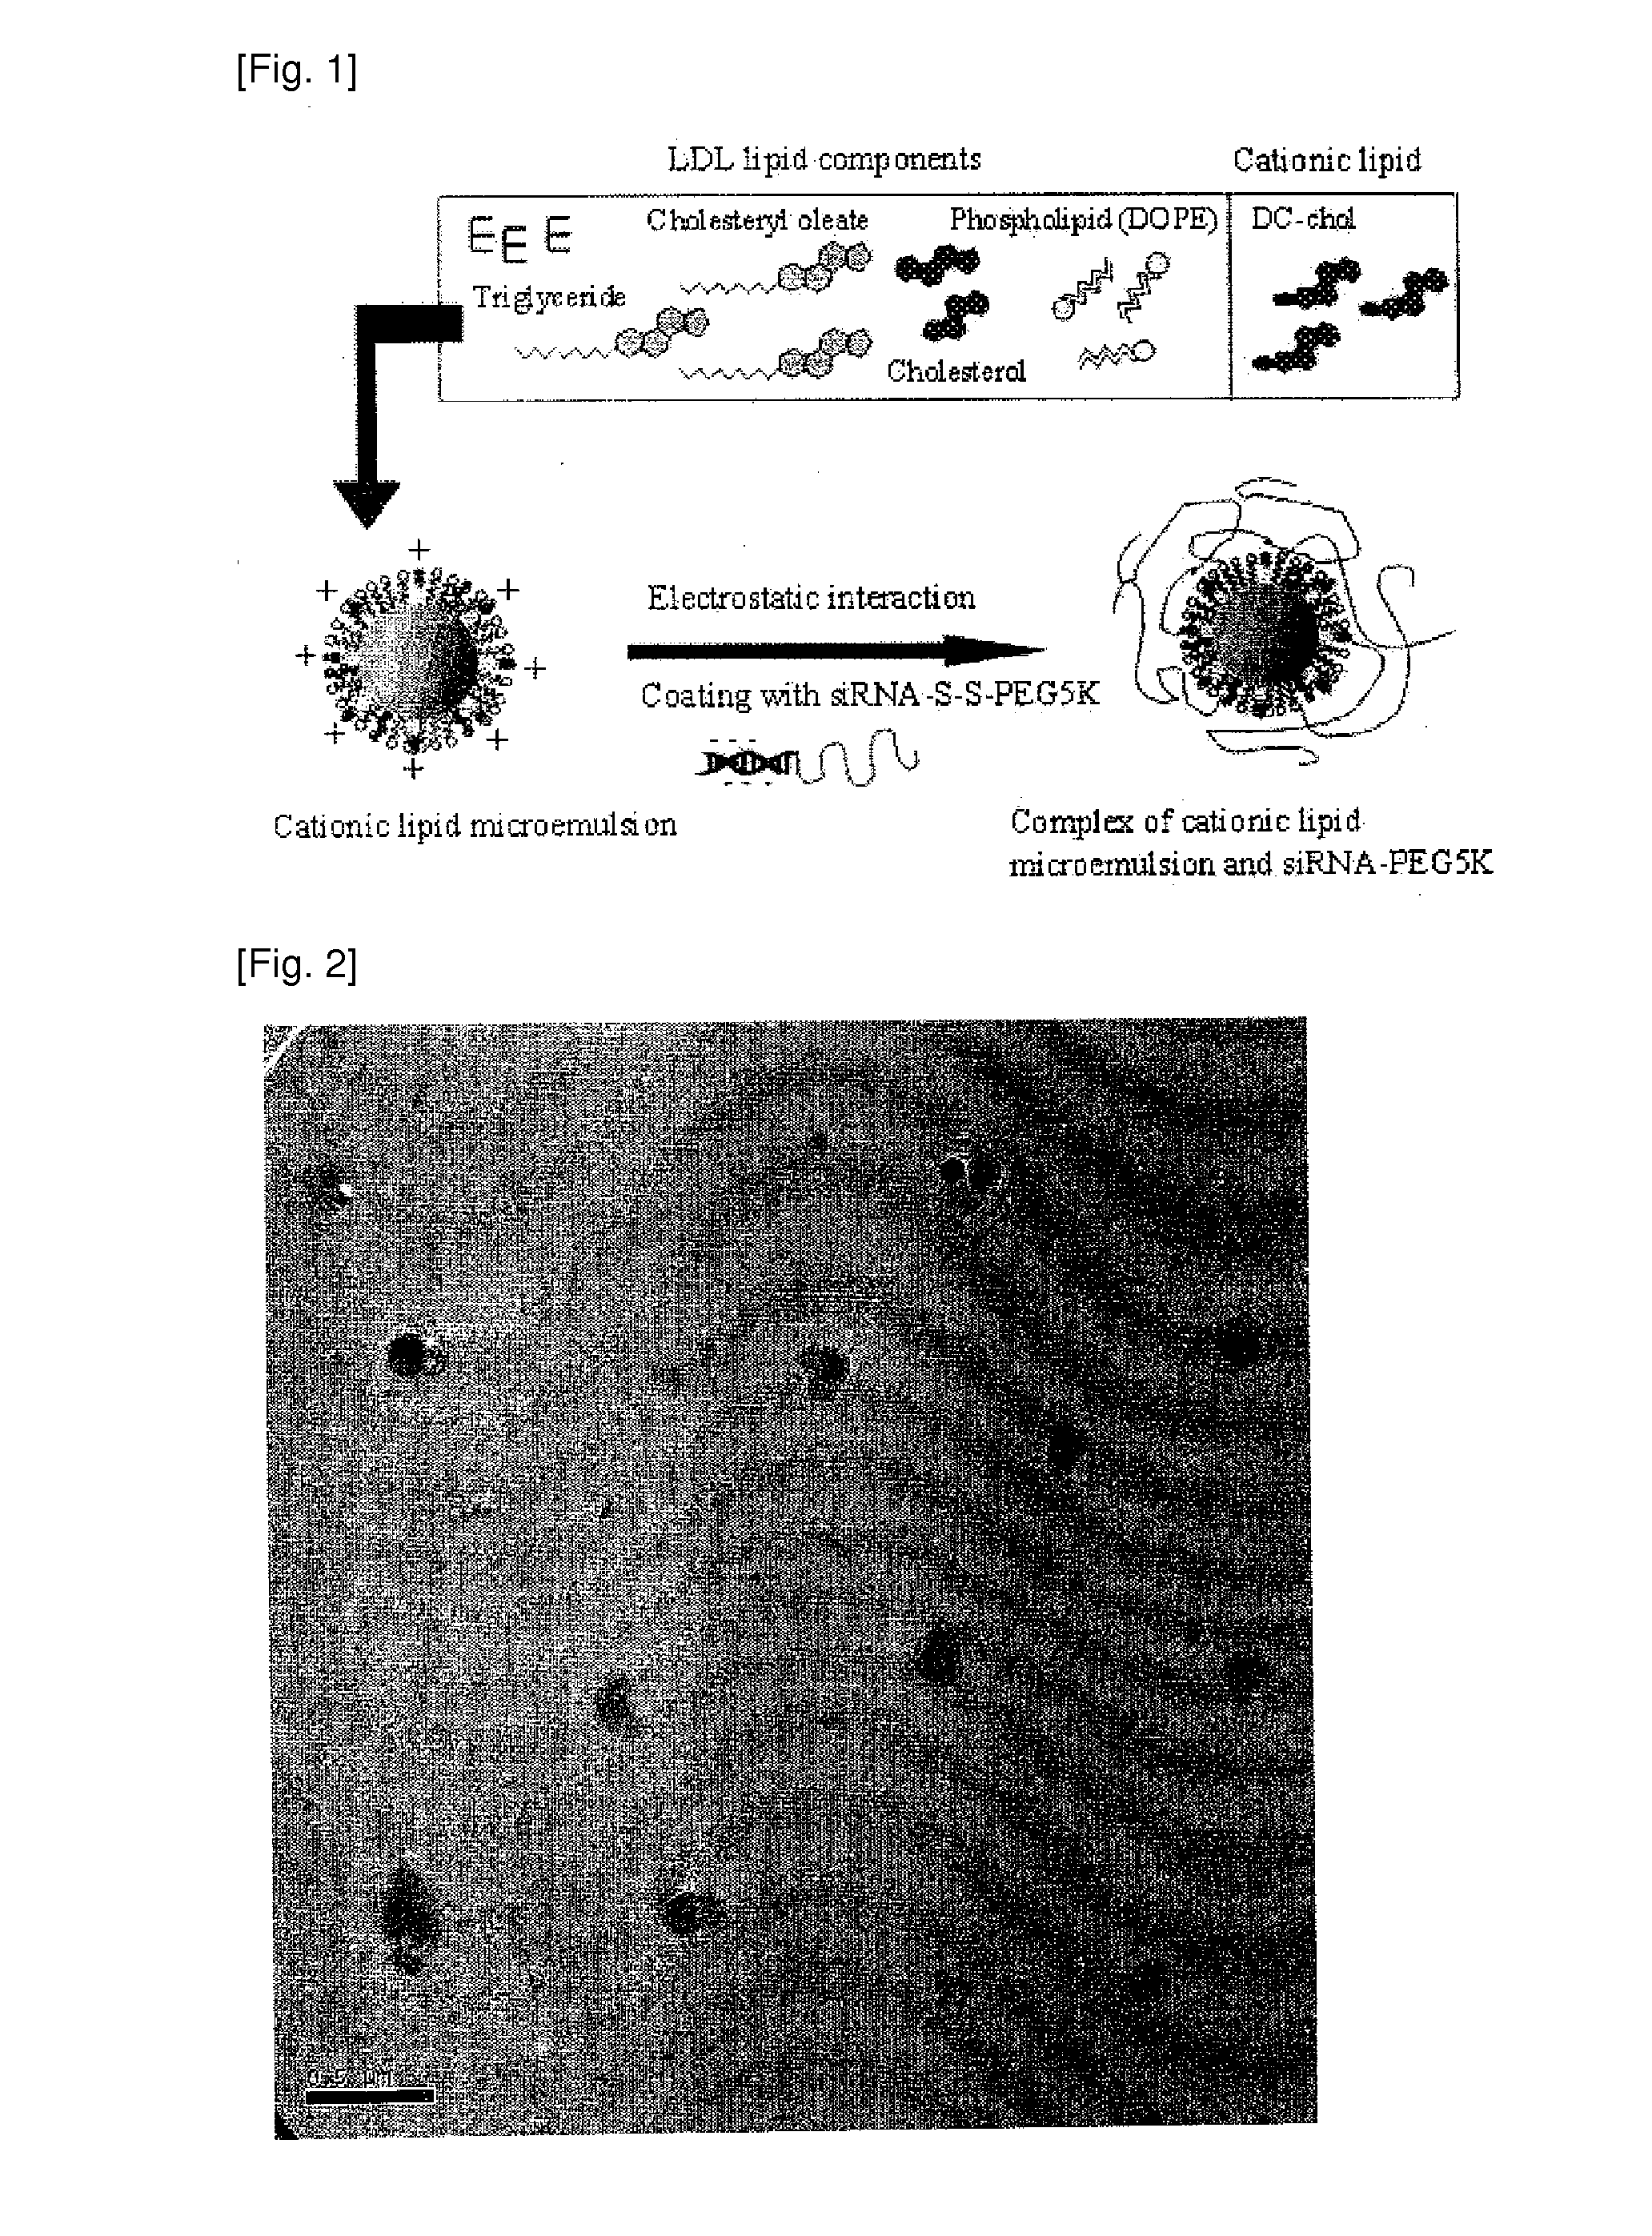 Ldl-like cationic nanoparticles for deliverying nucleic acid gene, method for preparing thereof and method for deliverying nucleic acid gene using the same